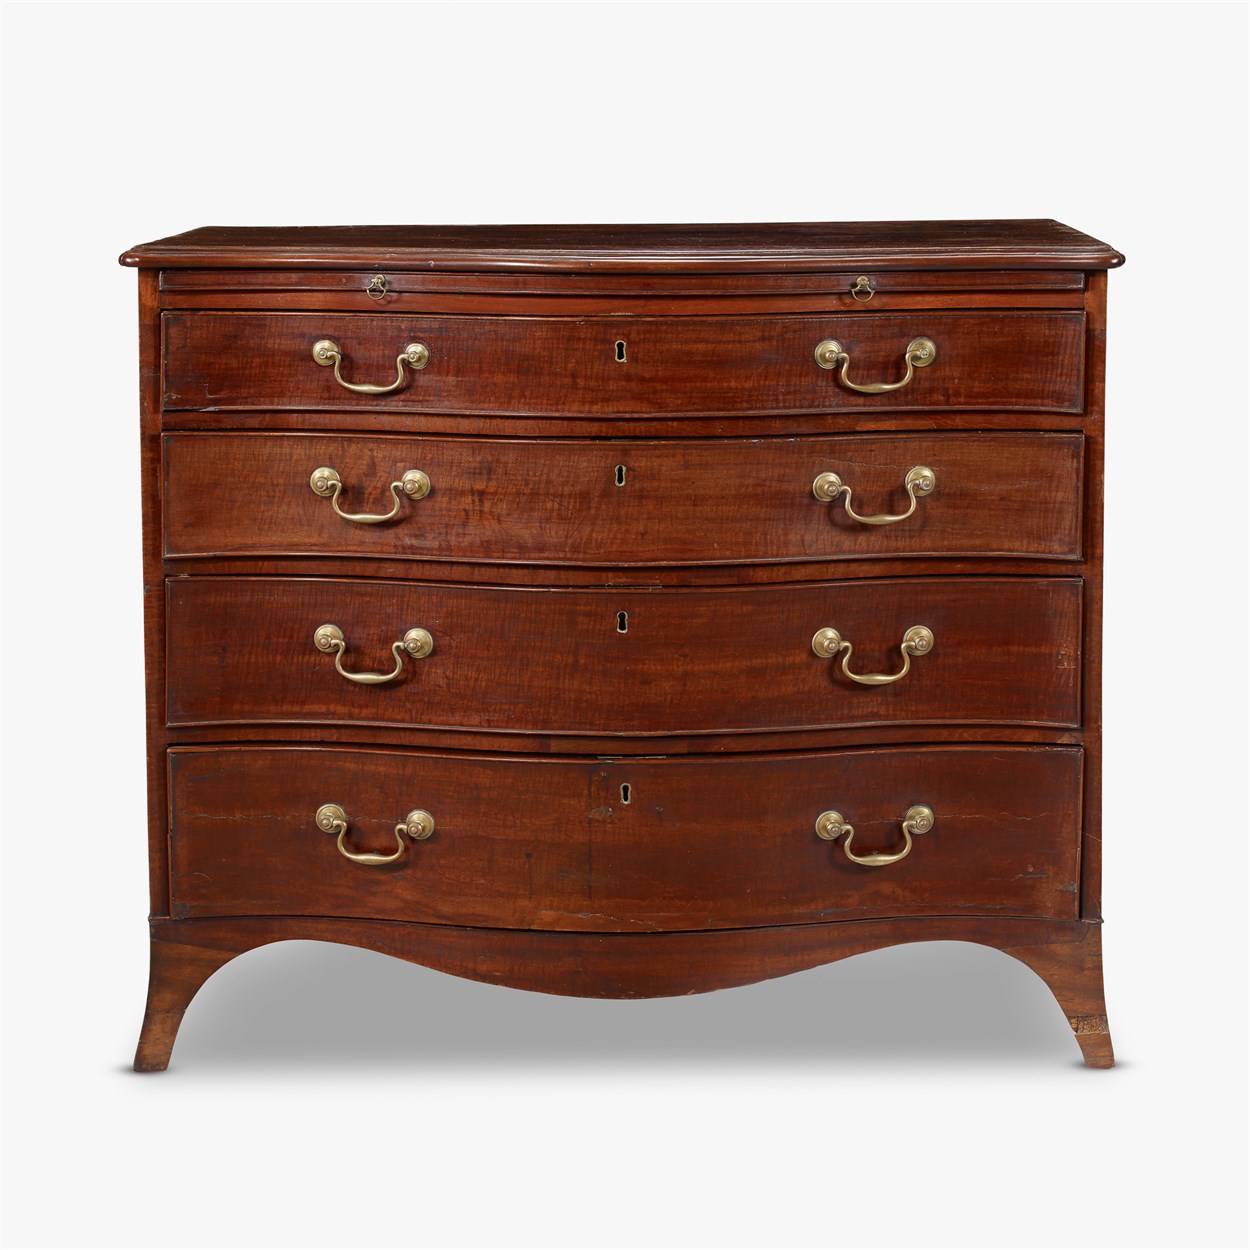 Lot 41 - George III mahogany serpentine chest of drawers